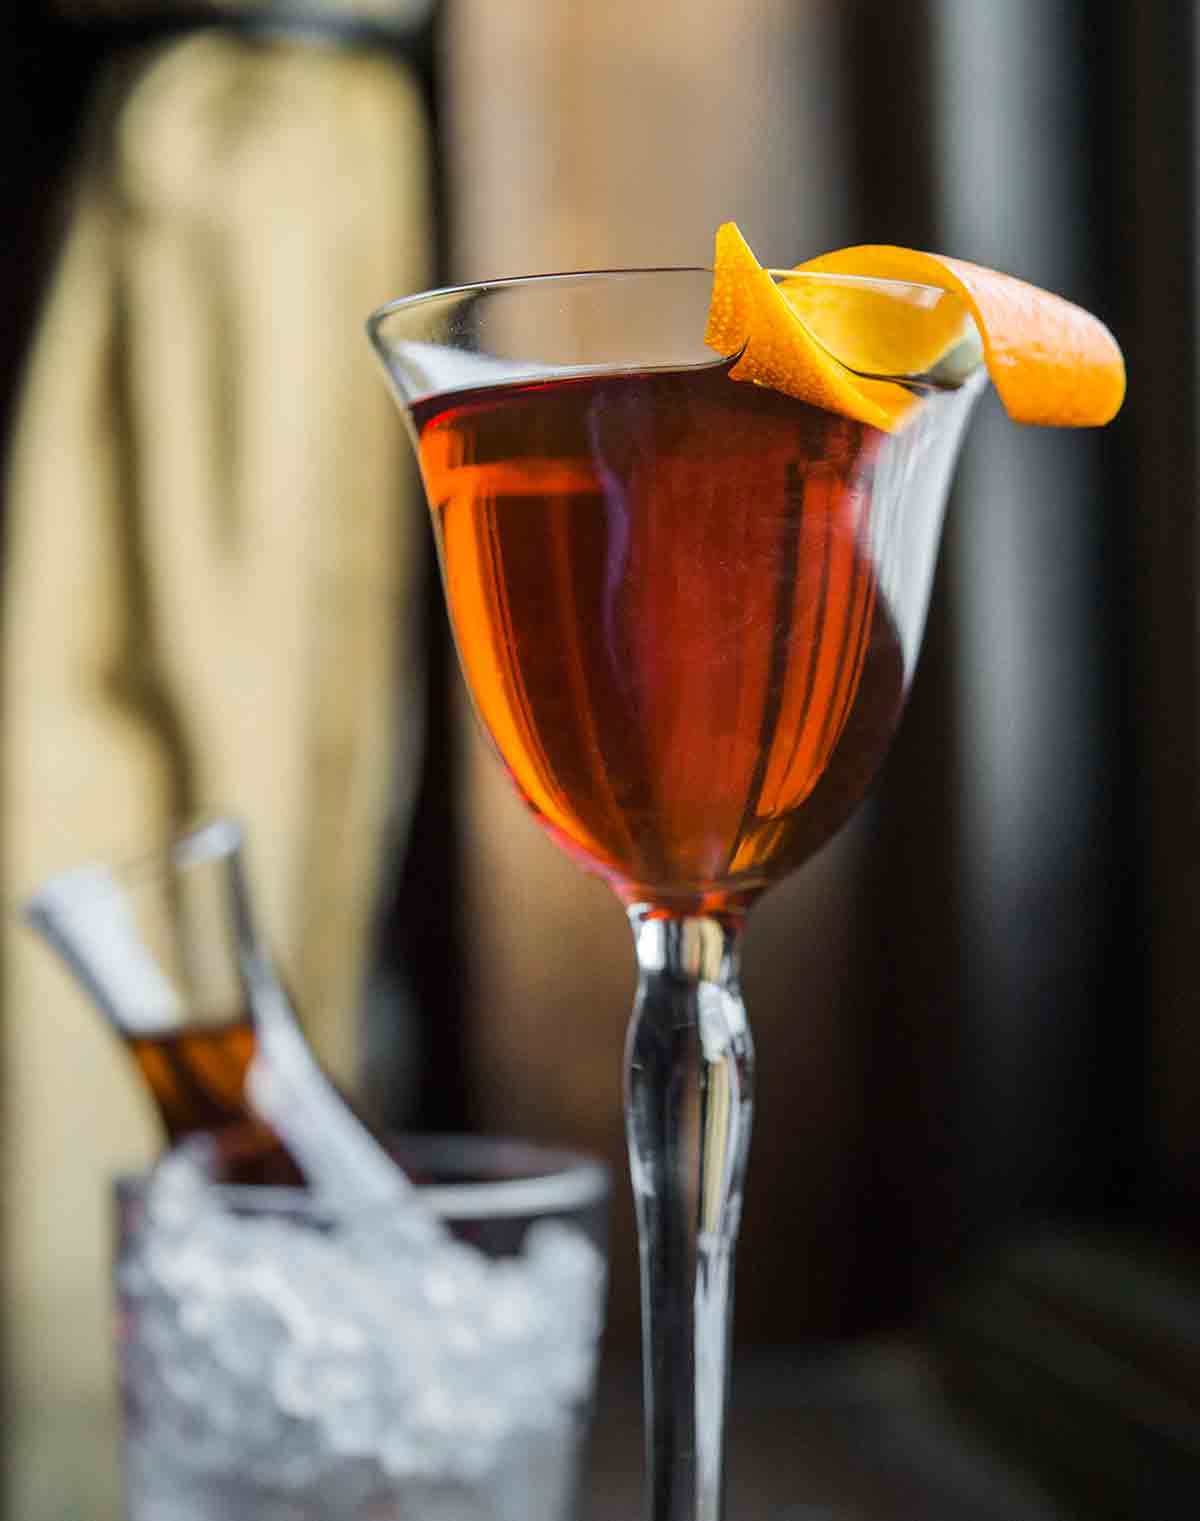 An aperitif glass filled with dark amber liquid and an orange twist on the rim.